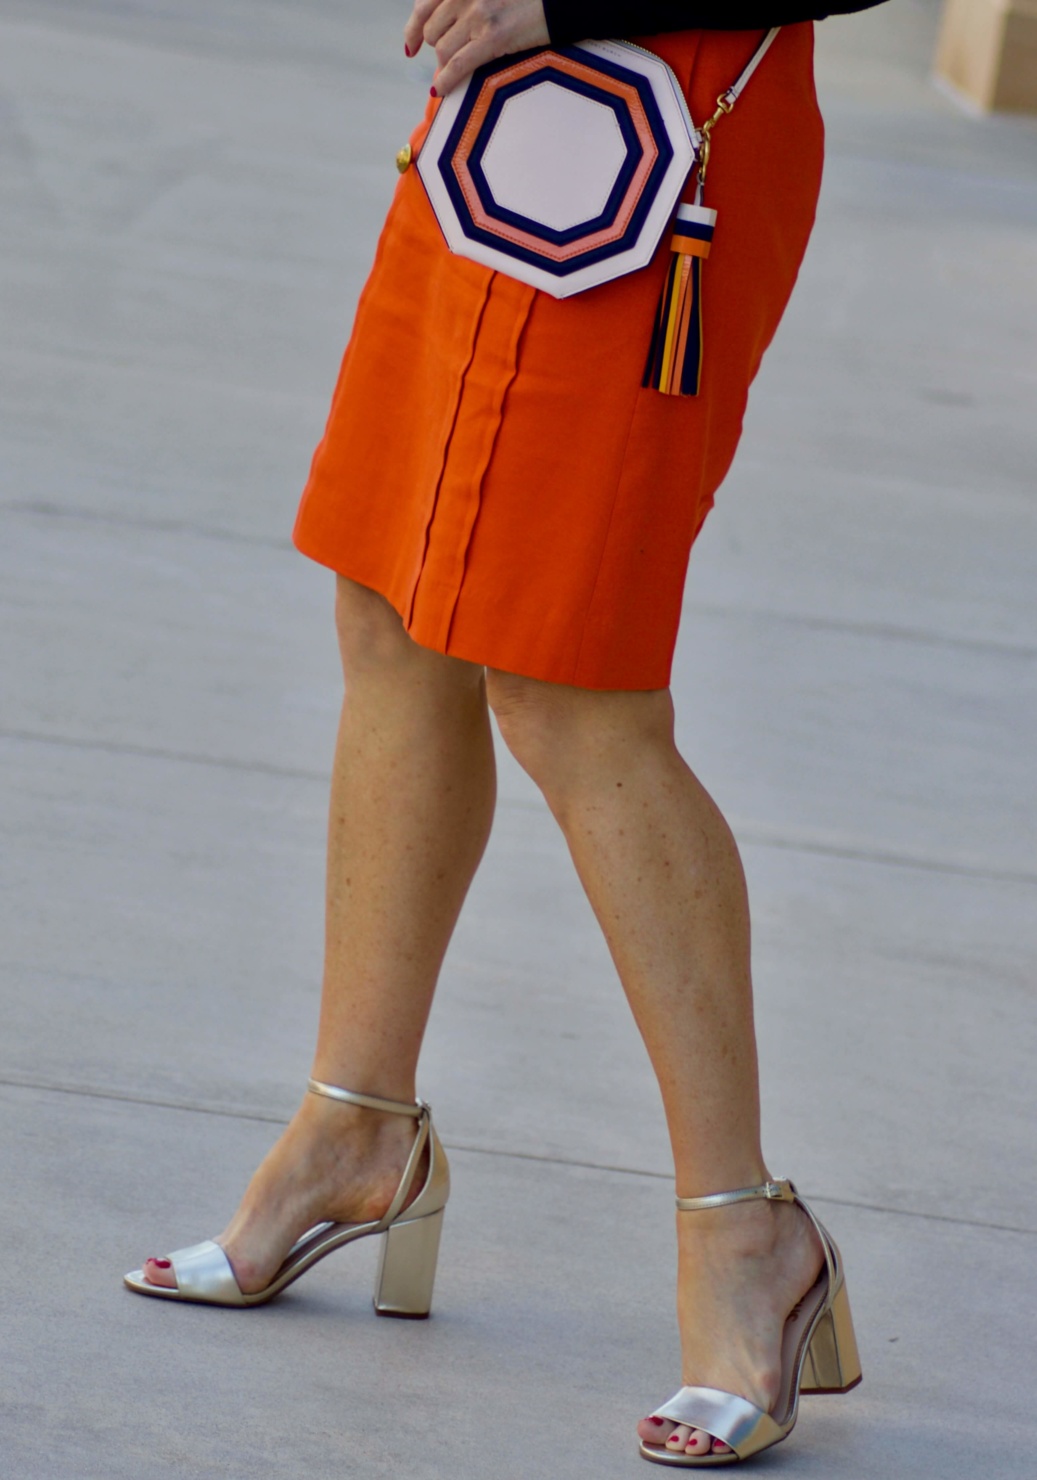 beth from Style at a Certain Age wears a J.Crew orange skirt, blue tee, gold sandals, and Tory Burch mini bag.